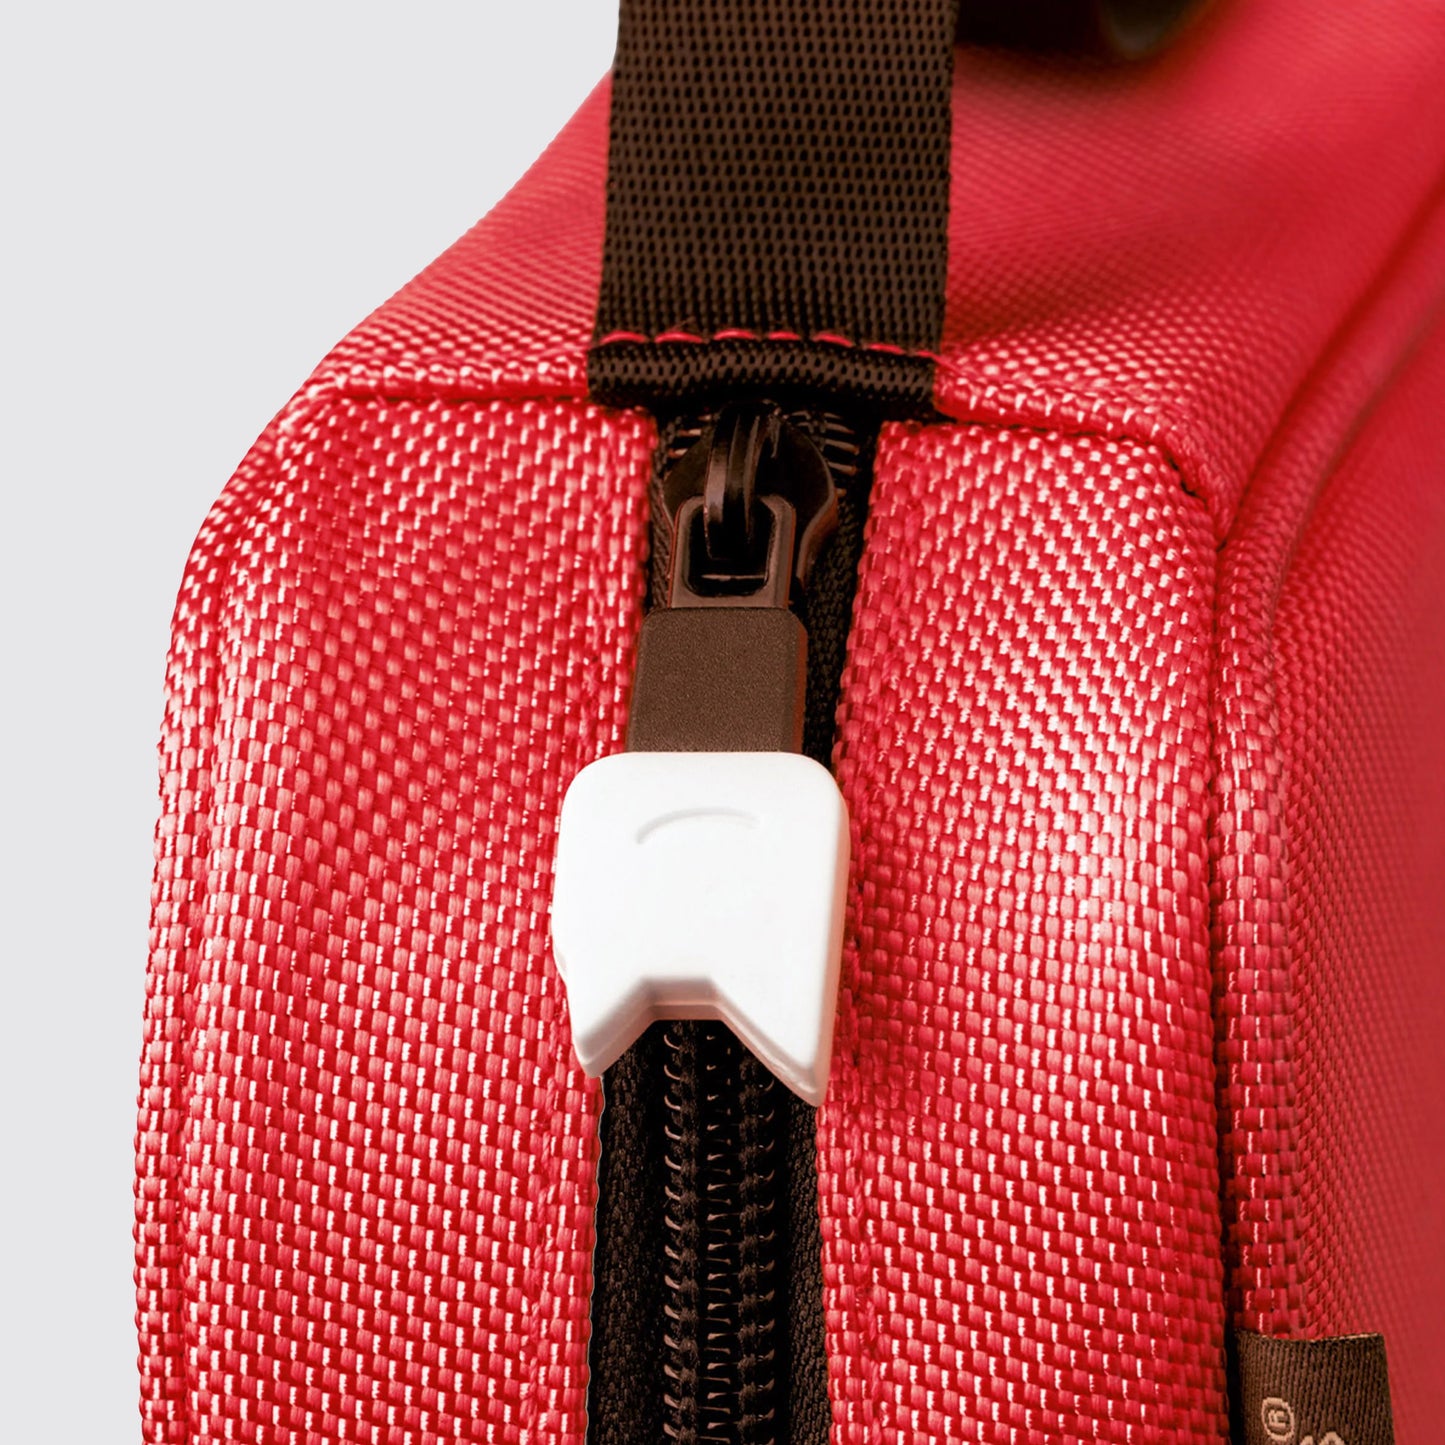 Tonies - Carrying Case (Red)